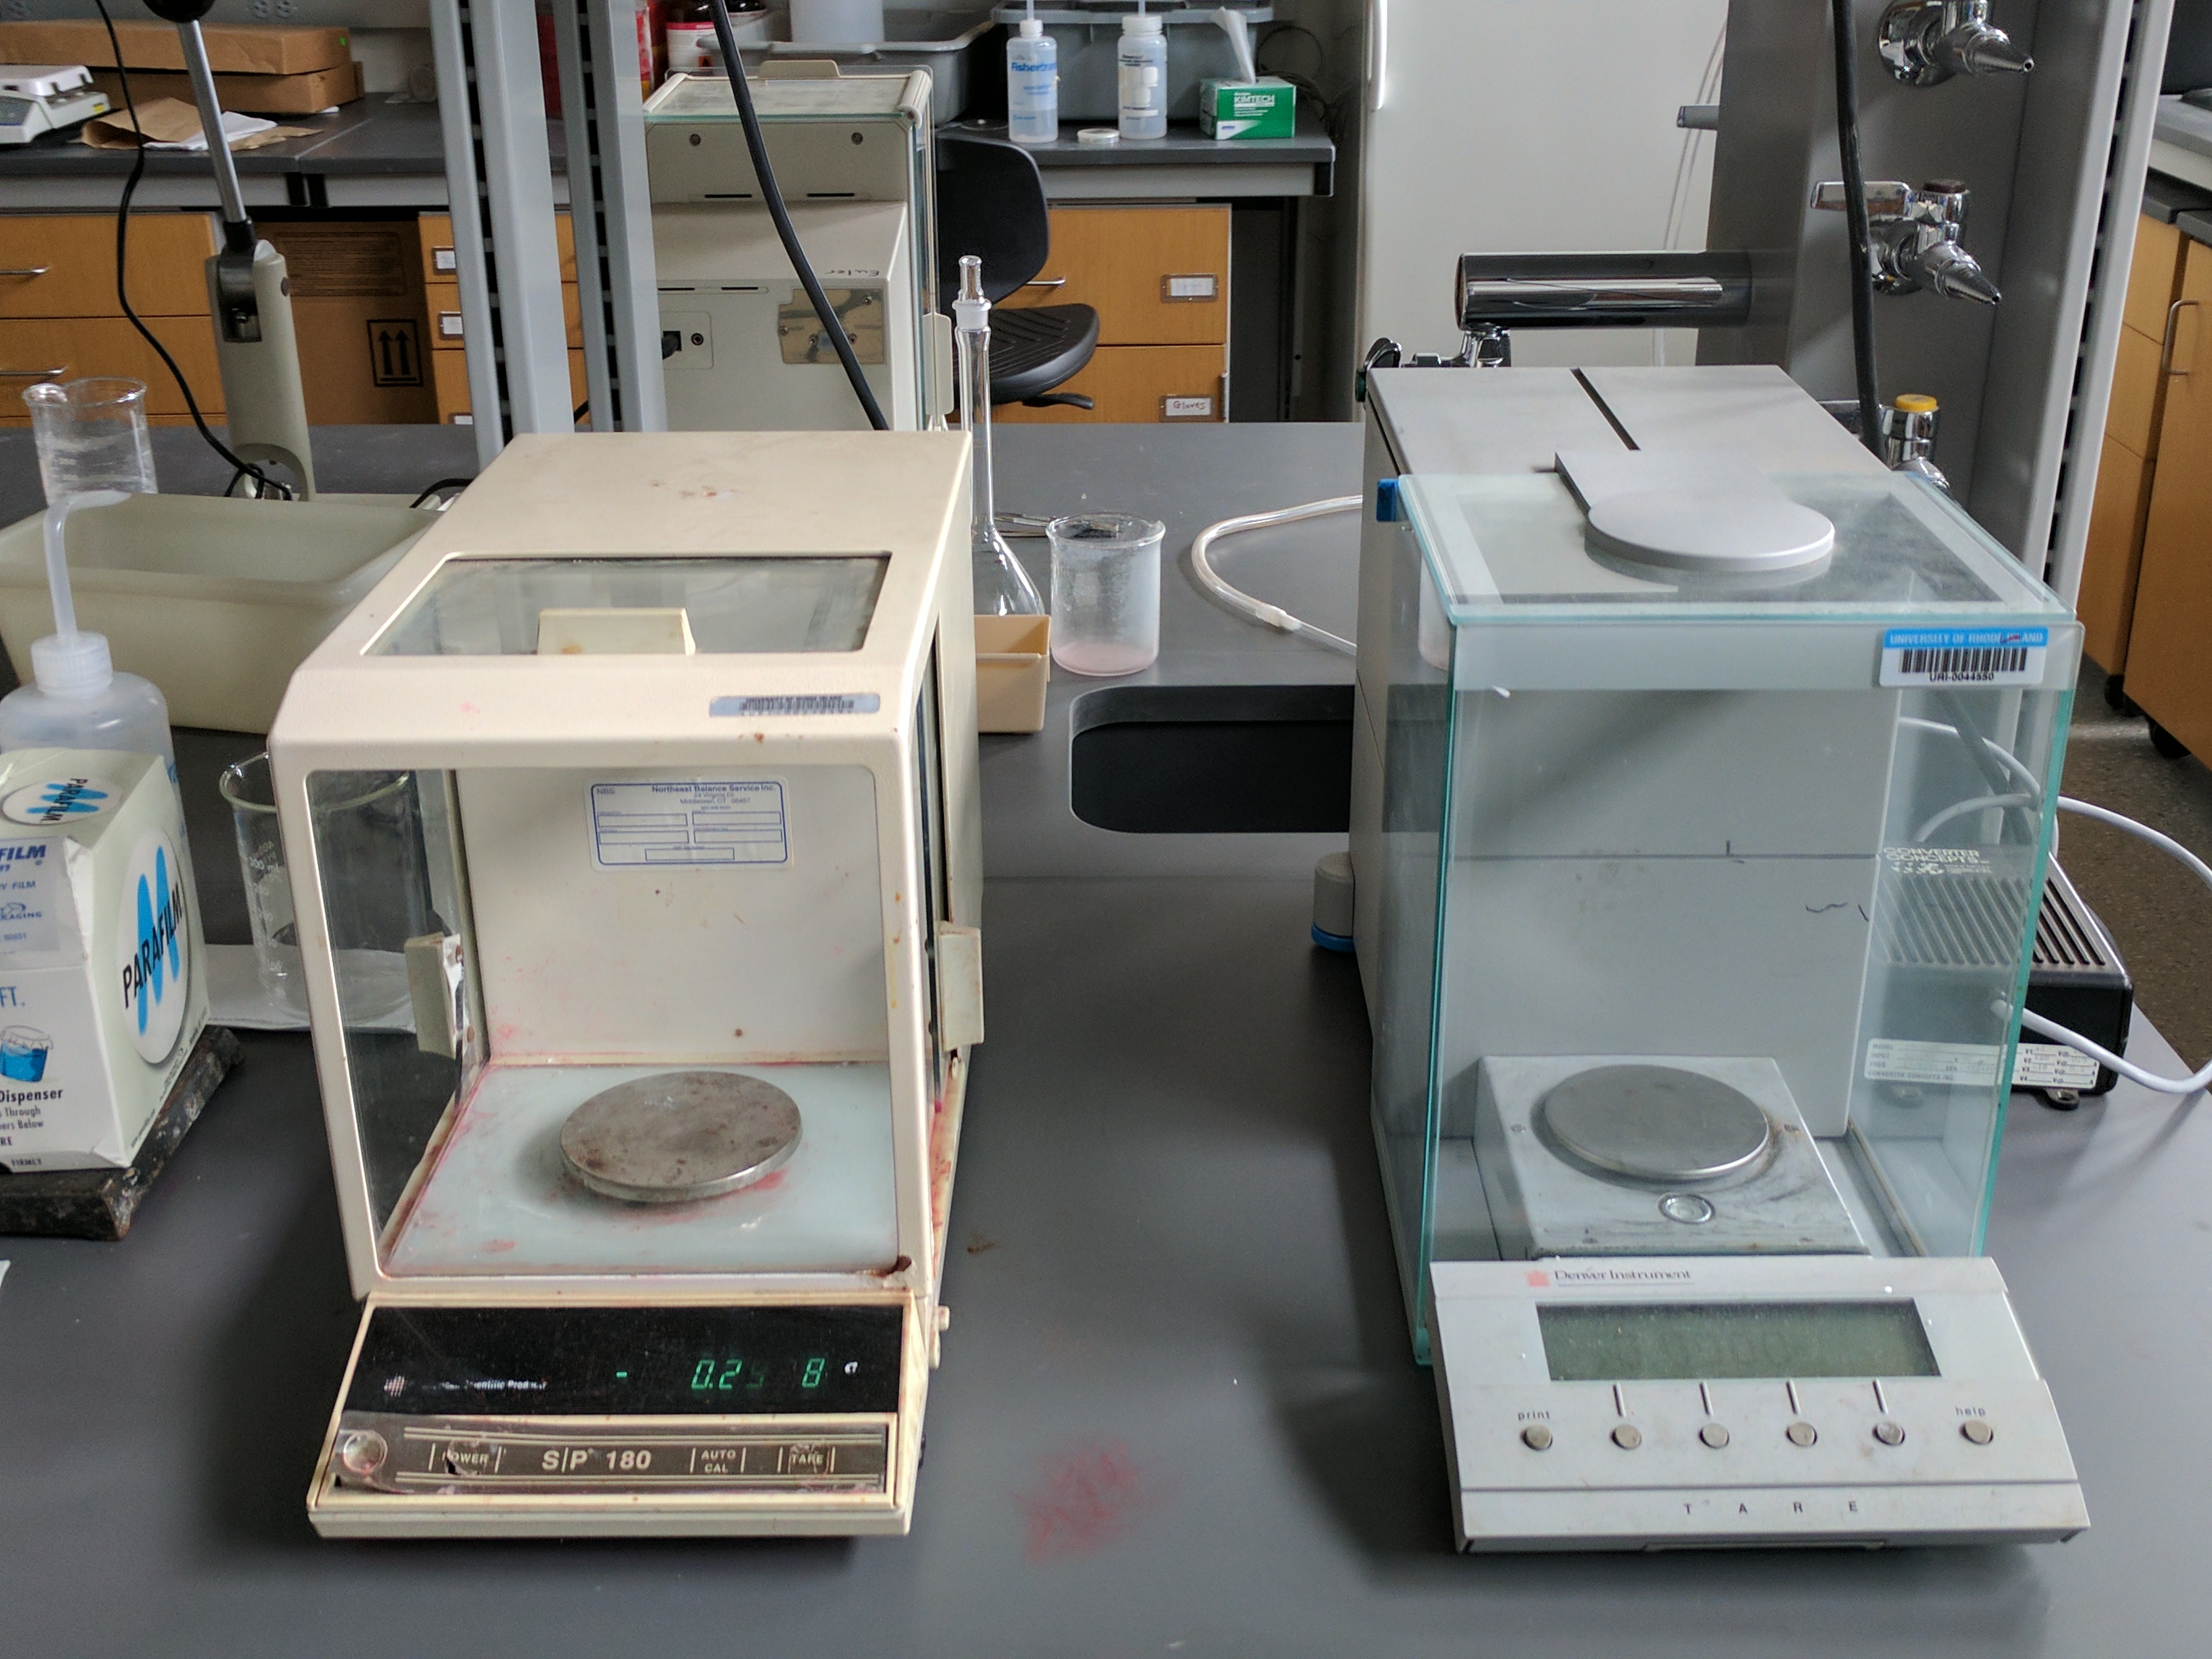 Analytical Balances: Both 4-place (left) and 5-place (right) analytical balances are used in the lab.